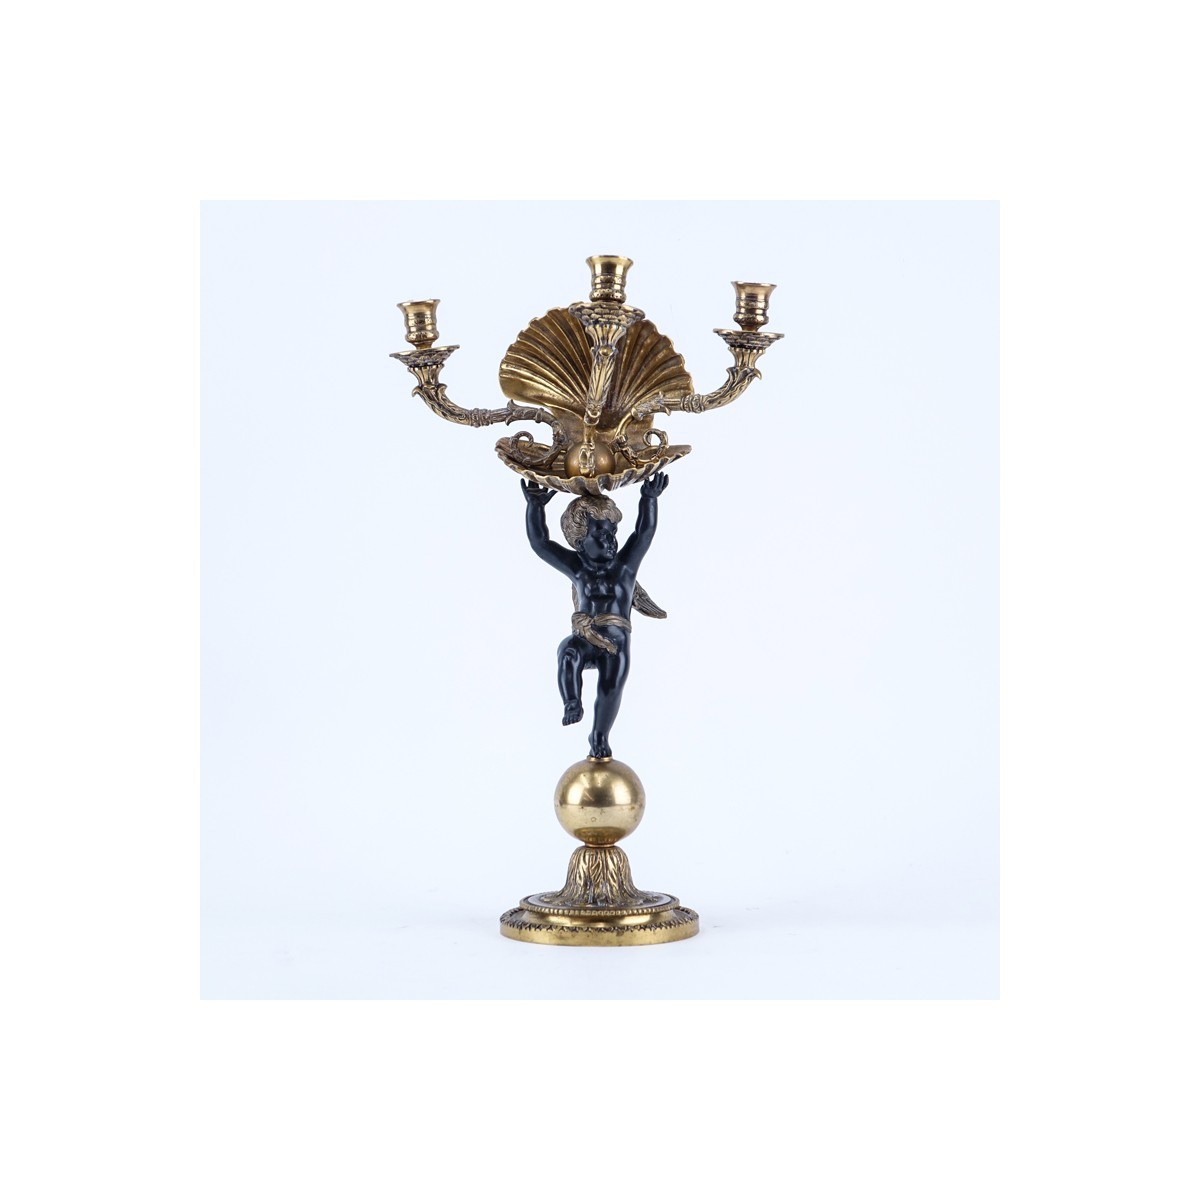 19/20th Century Empire Style Gilt Brass Three Arm Candelabrum with Cherub and Shell. Rubbing to gilt overall good condition.